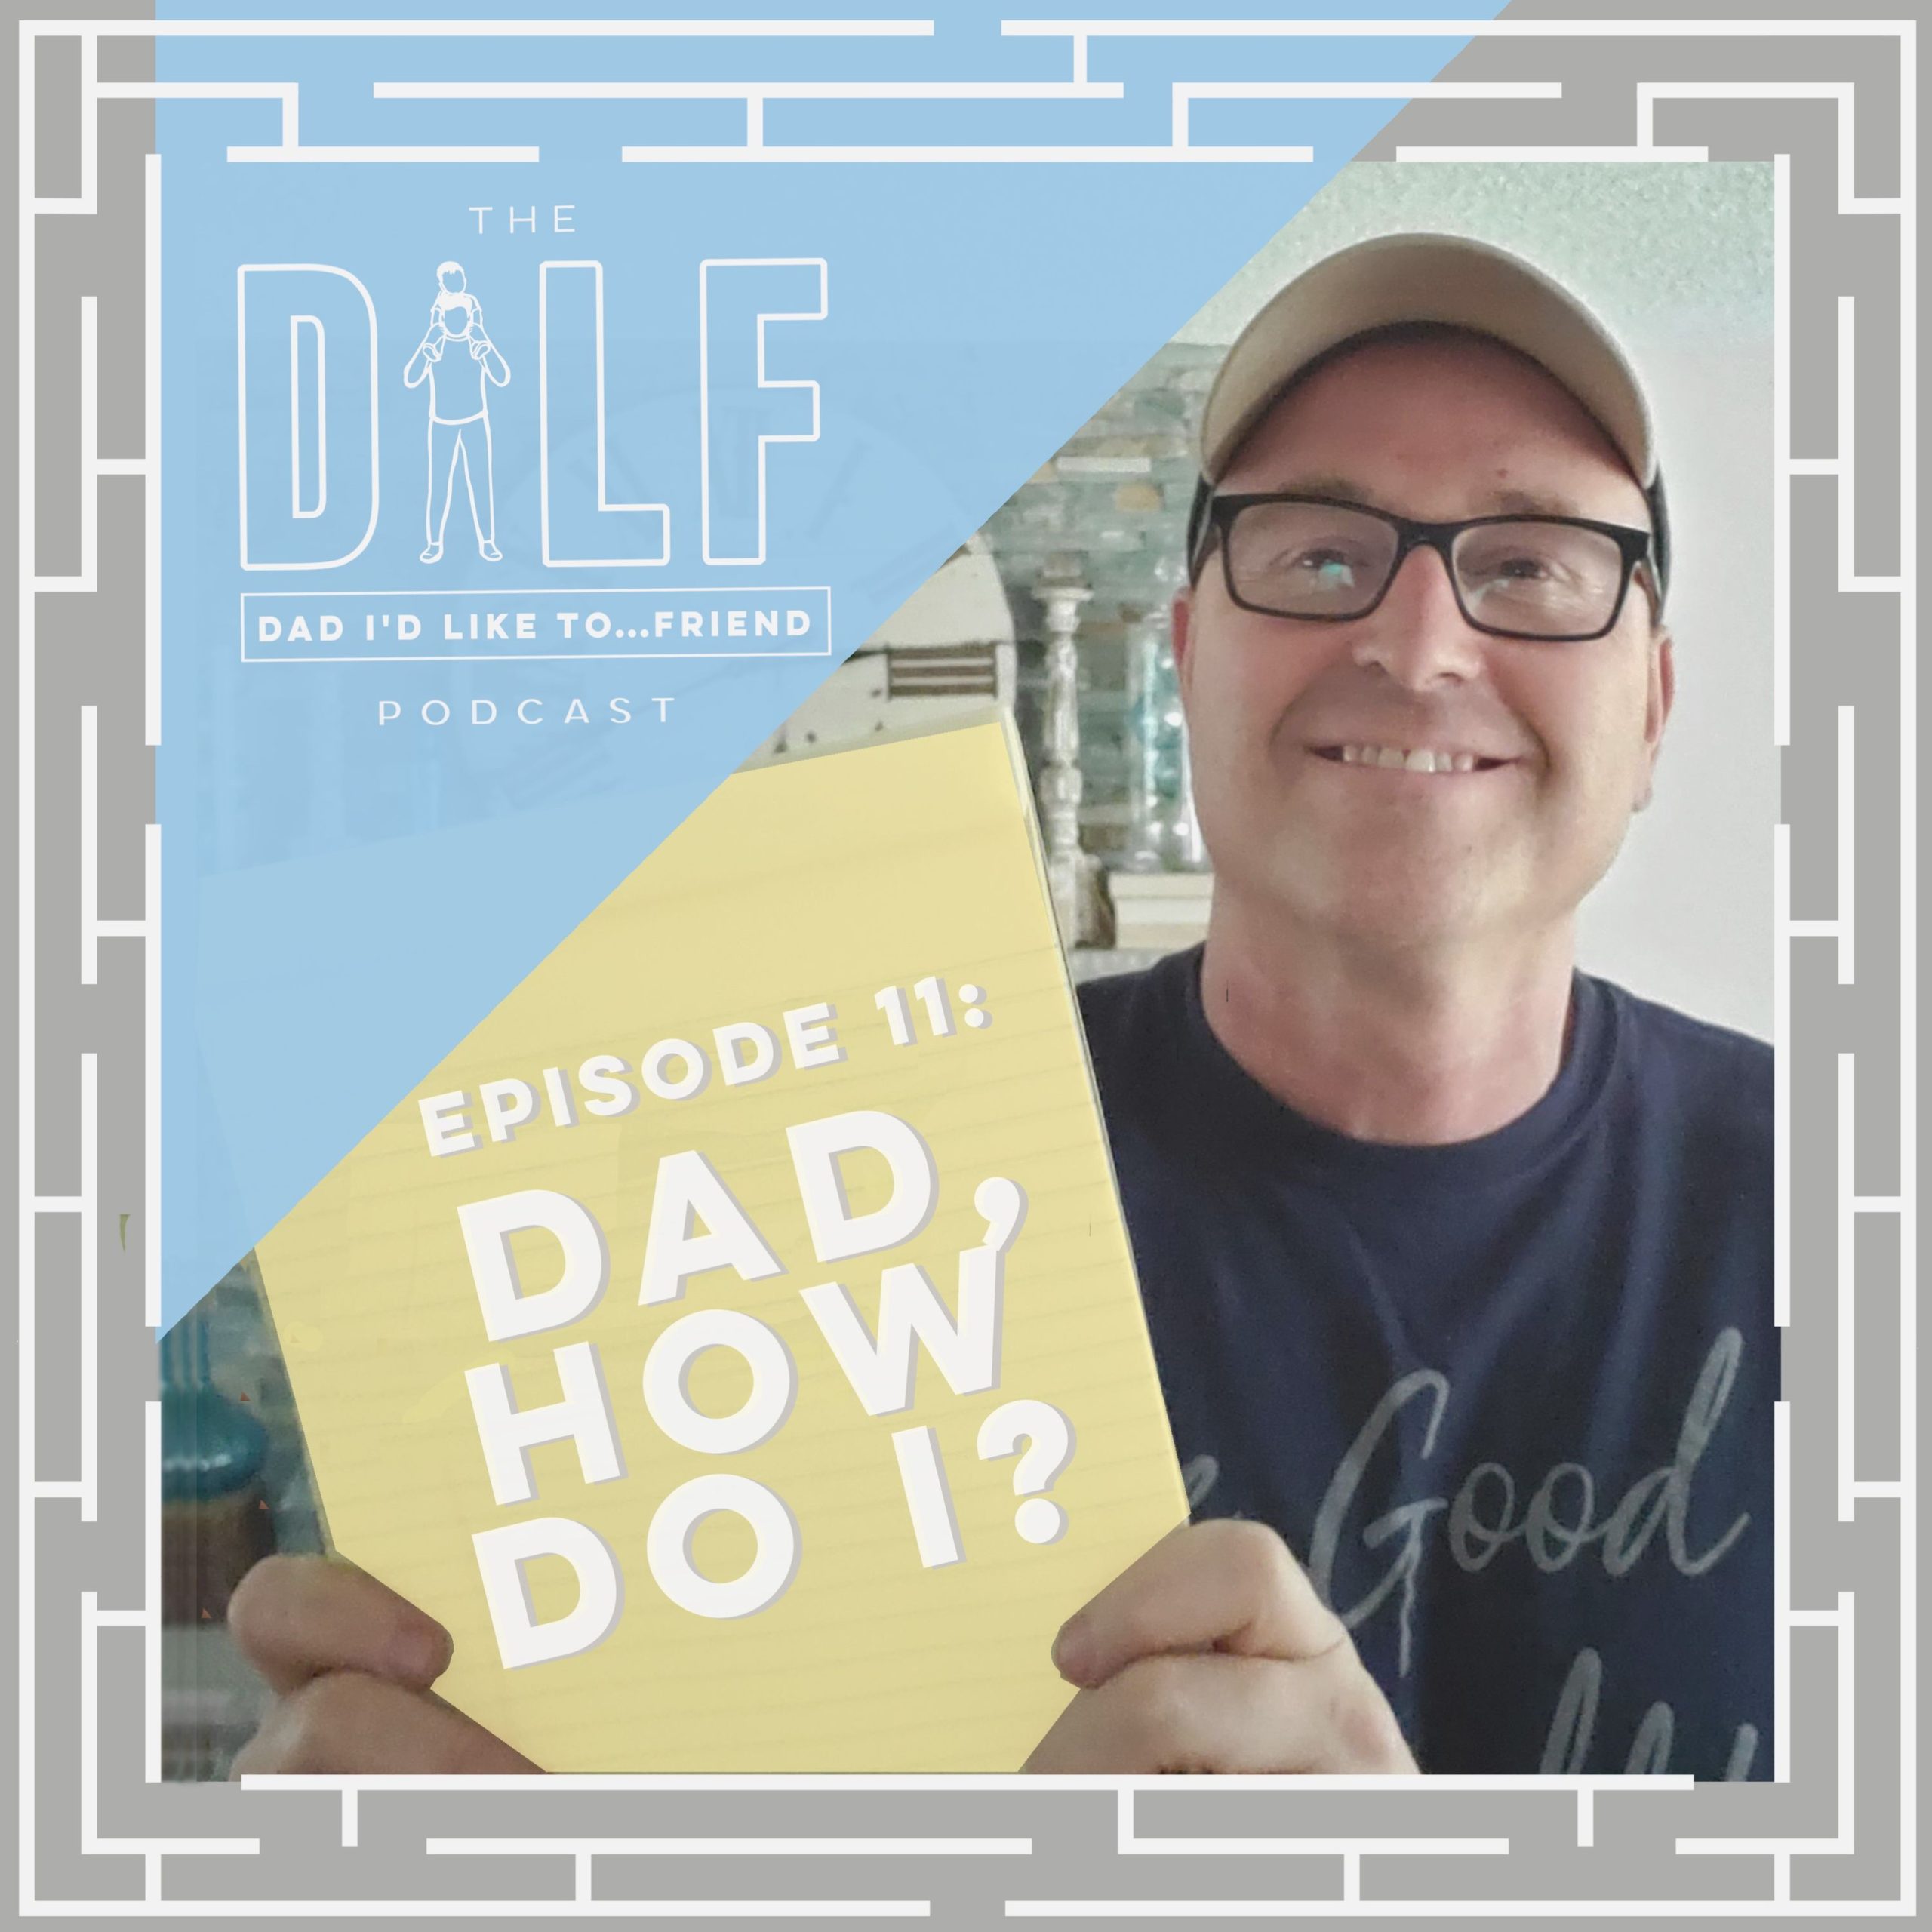 Cover Art with Rob Kenney (Dad, How Do I?) from Season One of Top Parenting Podcast, DILF (DAD I’D LIKE TO FREIND)